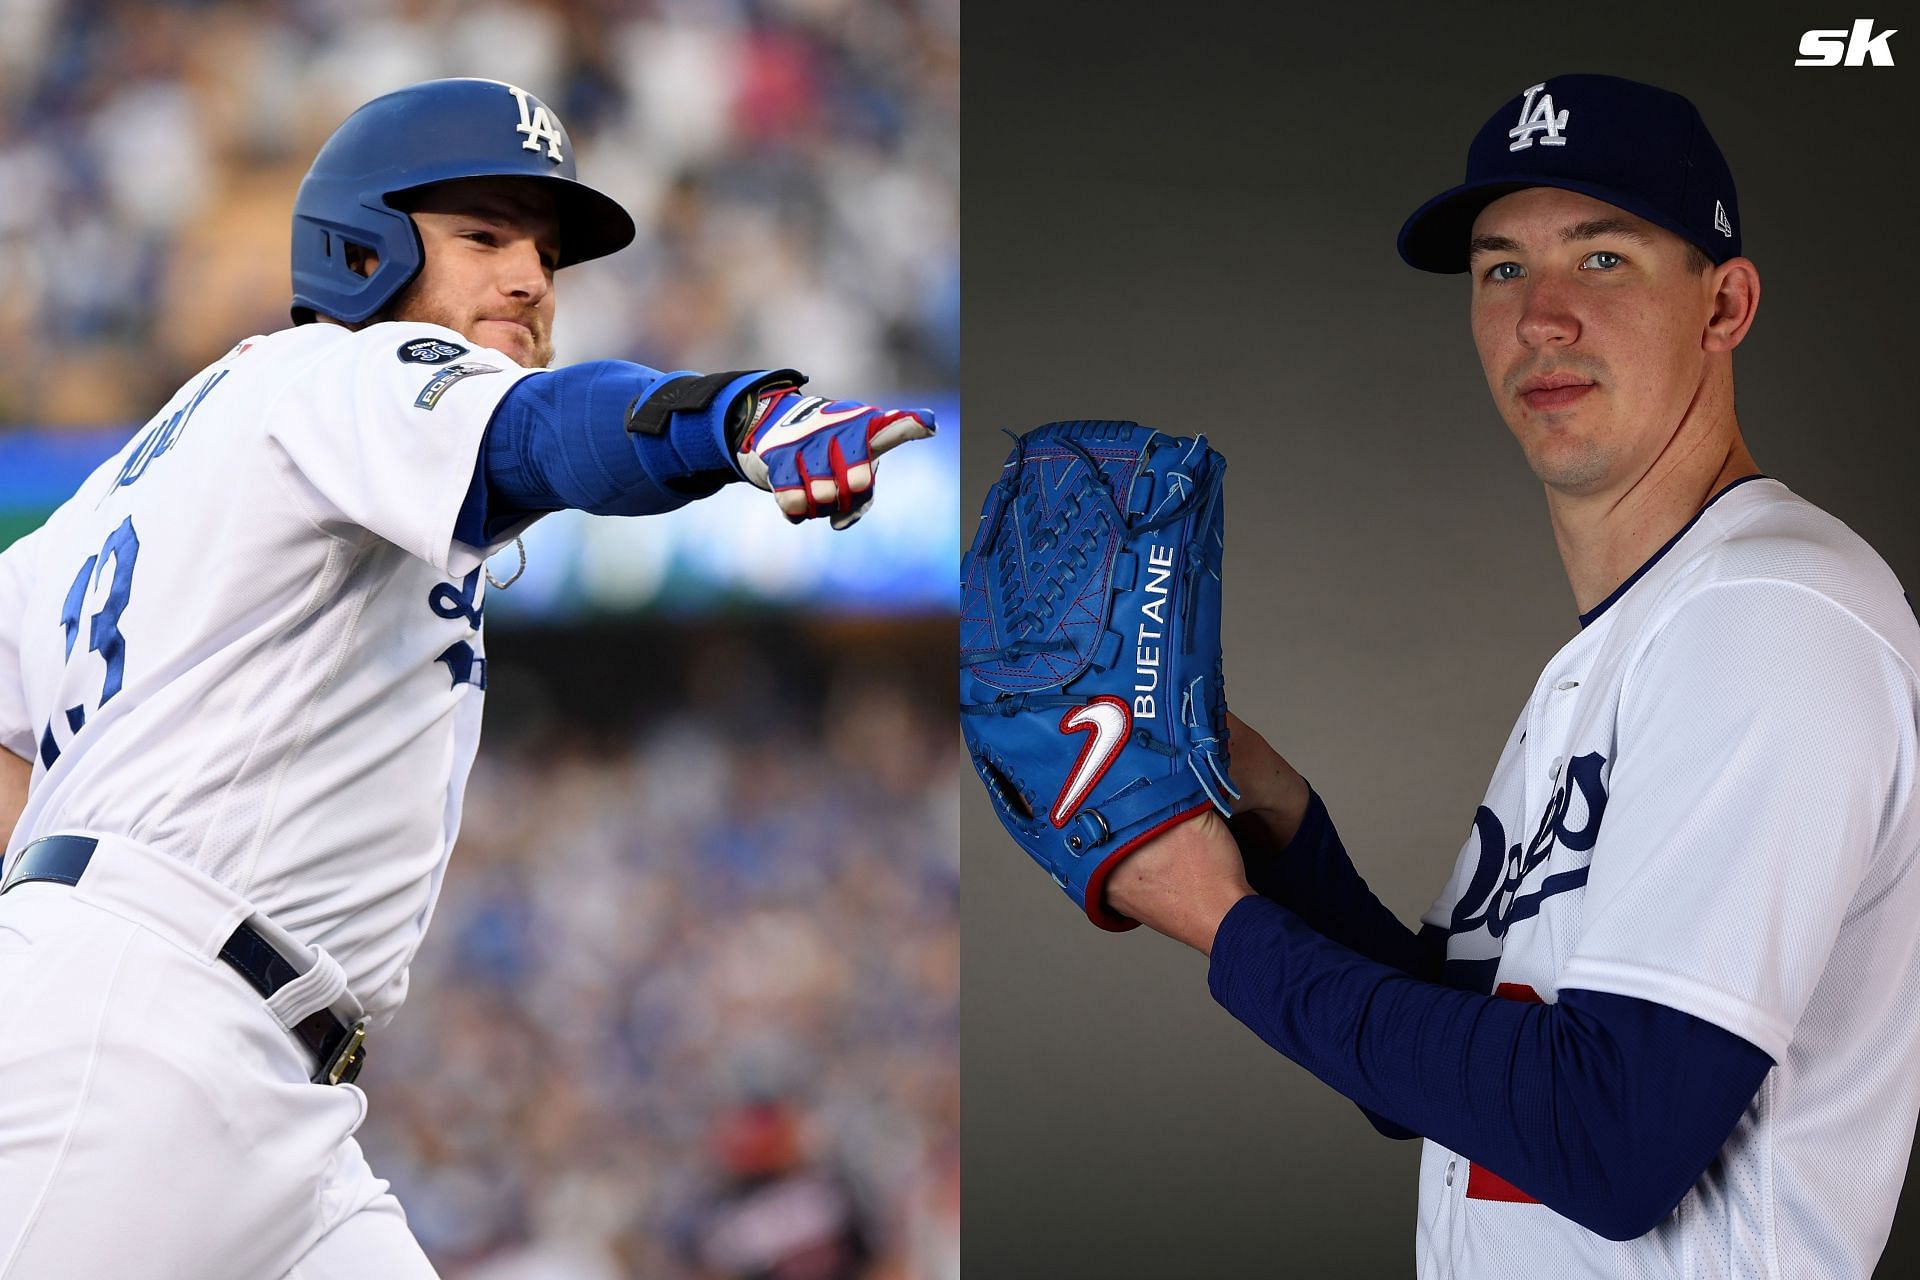 Max Muncy happy to have Buehler back on the team